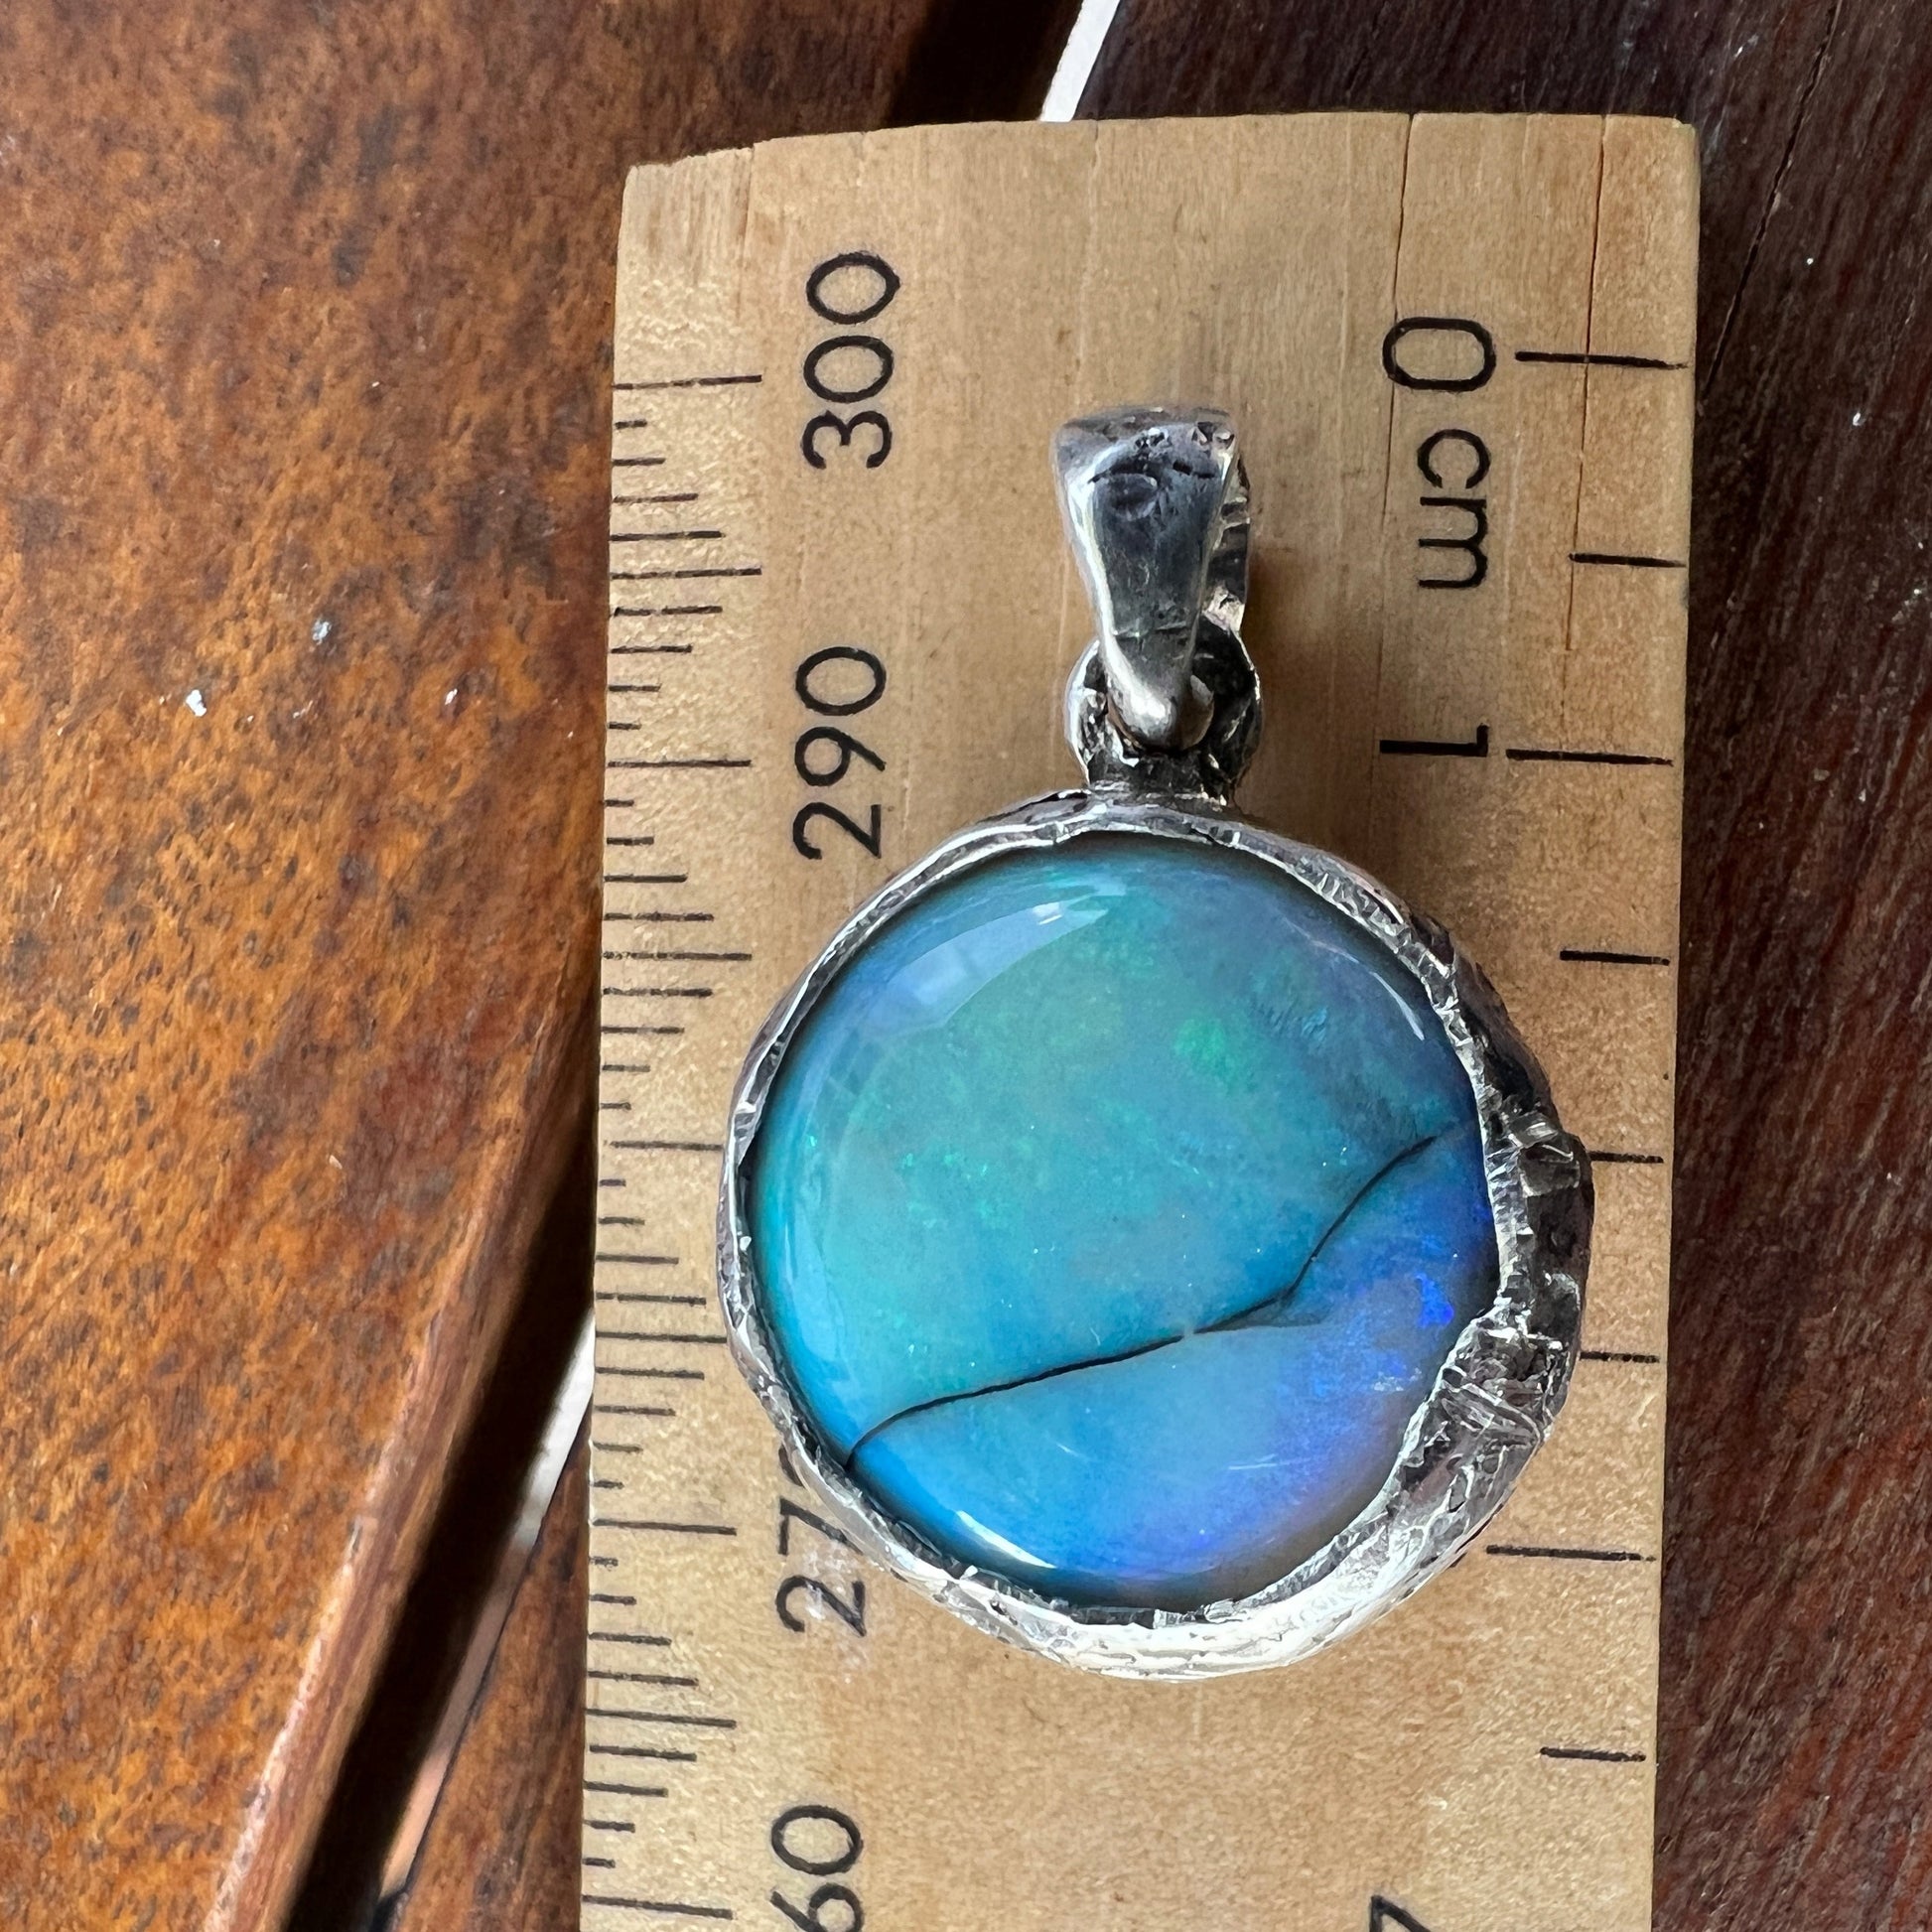 Awesome Lightning Ridge picture stone opal. Mounted with Argentium silver which shows off the stone perfectly. A beautiful design by Sally Fisher. 